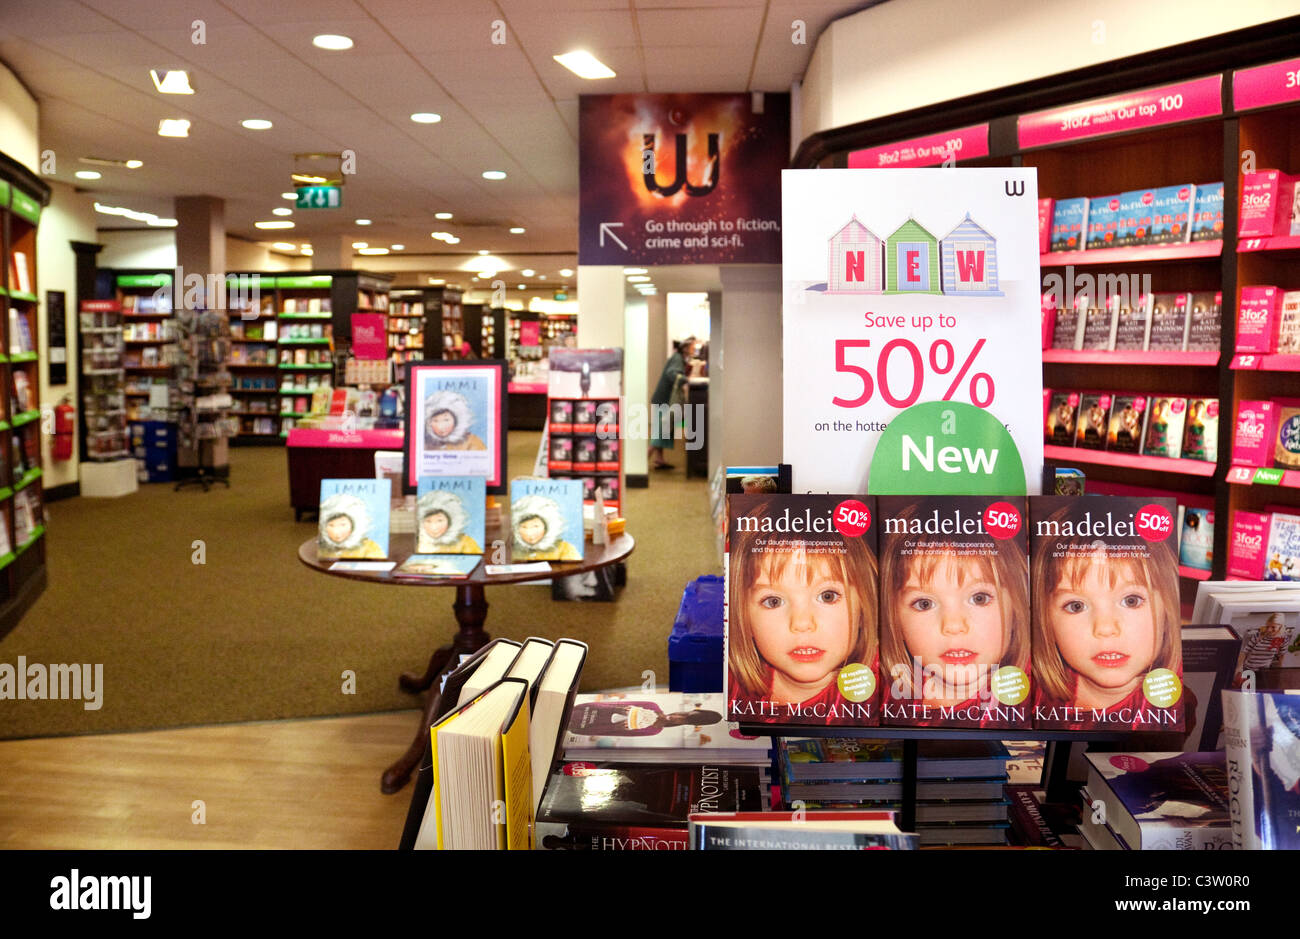 Kate McCann's book about her missing daughter Madeleine for sale in waterstones bookshop, Cambridge UK Stock Photo